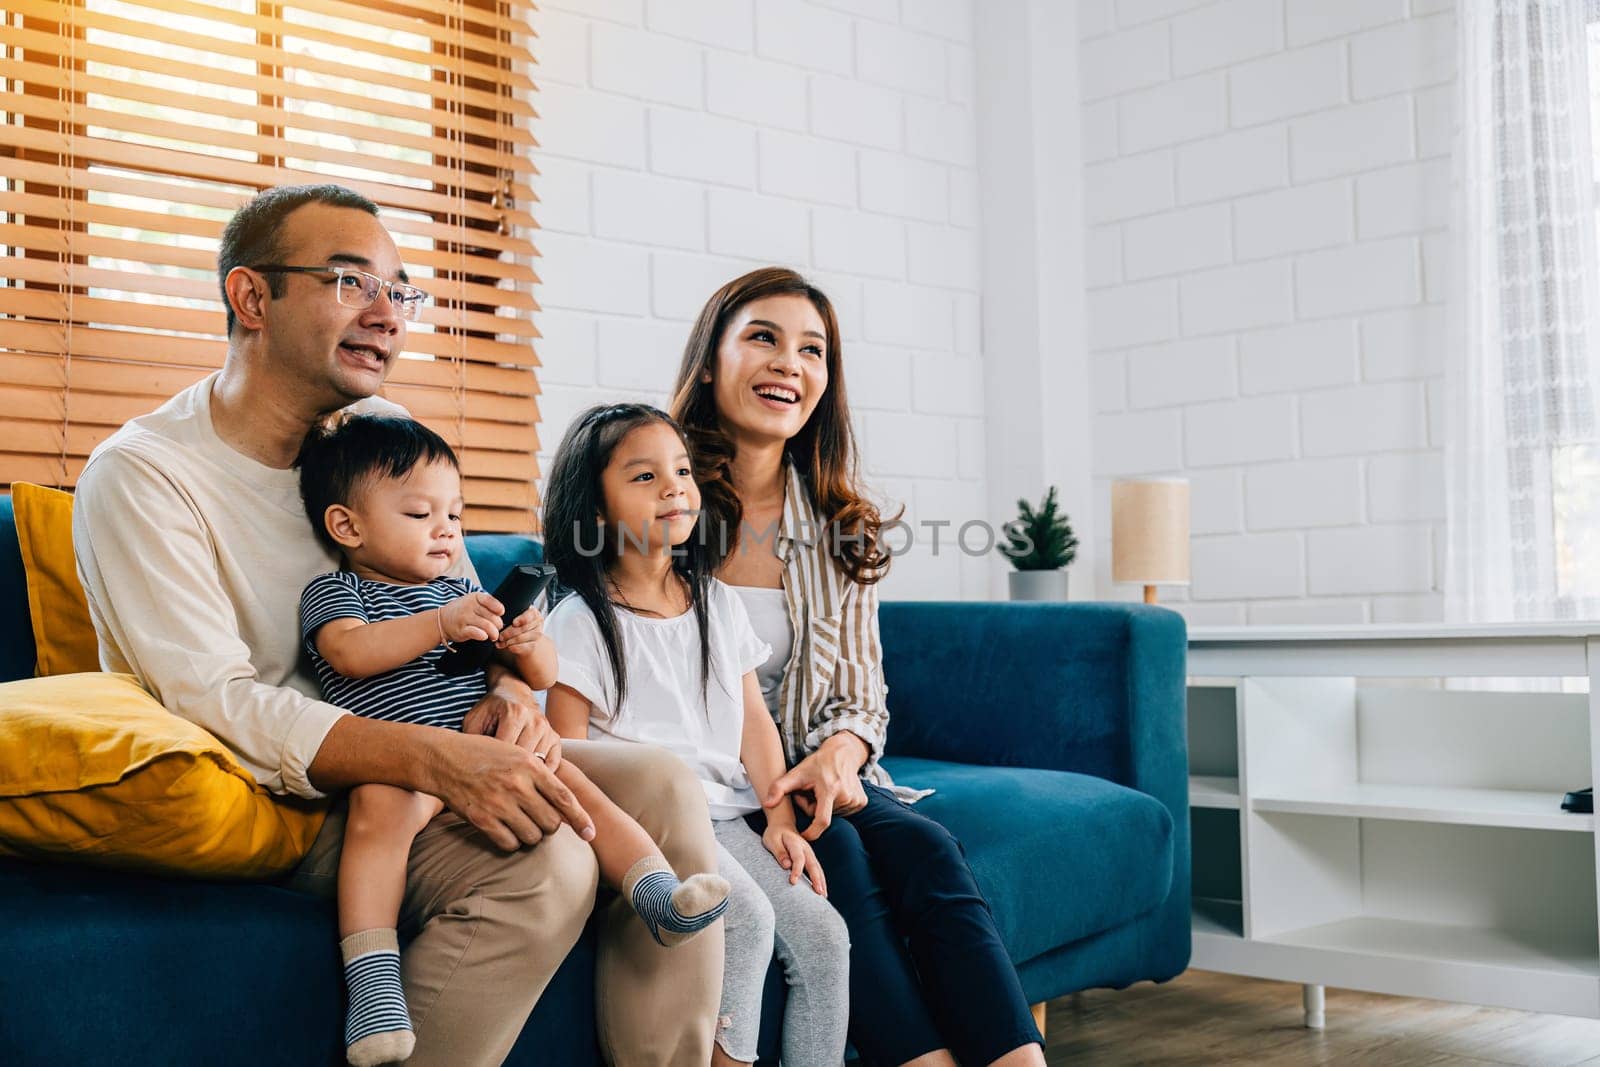 A happy family with kids finds relaxation and togetherness while watching TV movies on the sofa in their grooved modern living room. The father mother son and daughter share smiles laughter and fun.